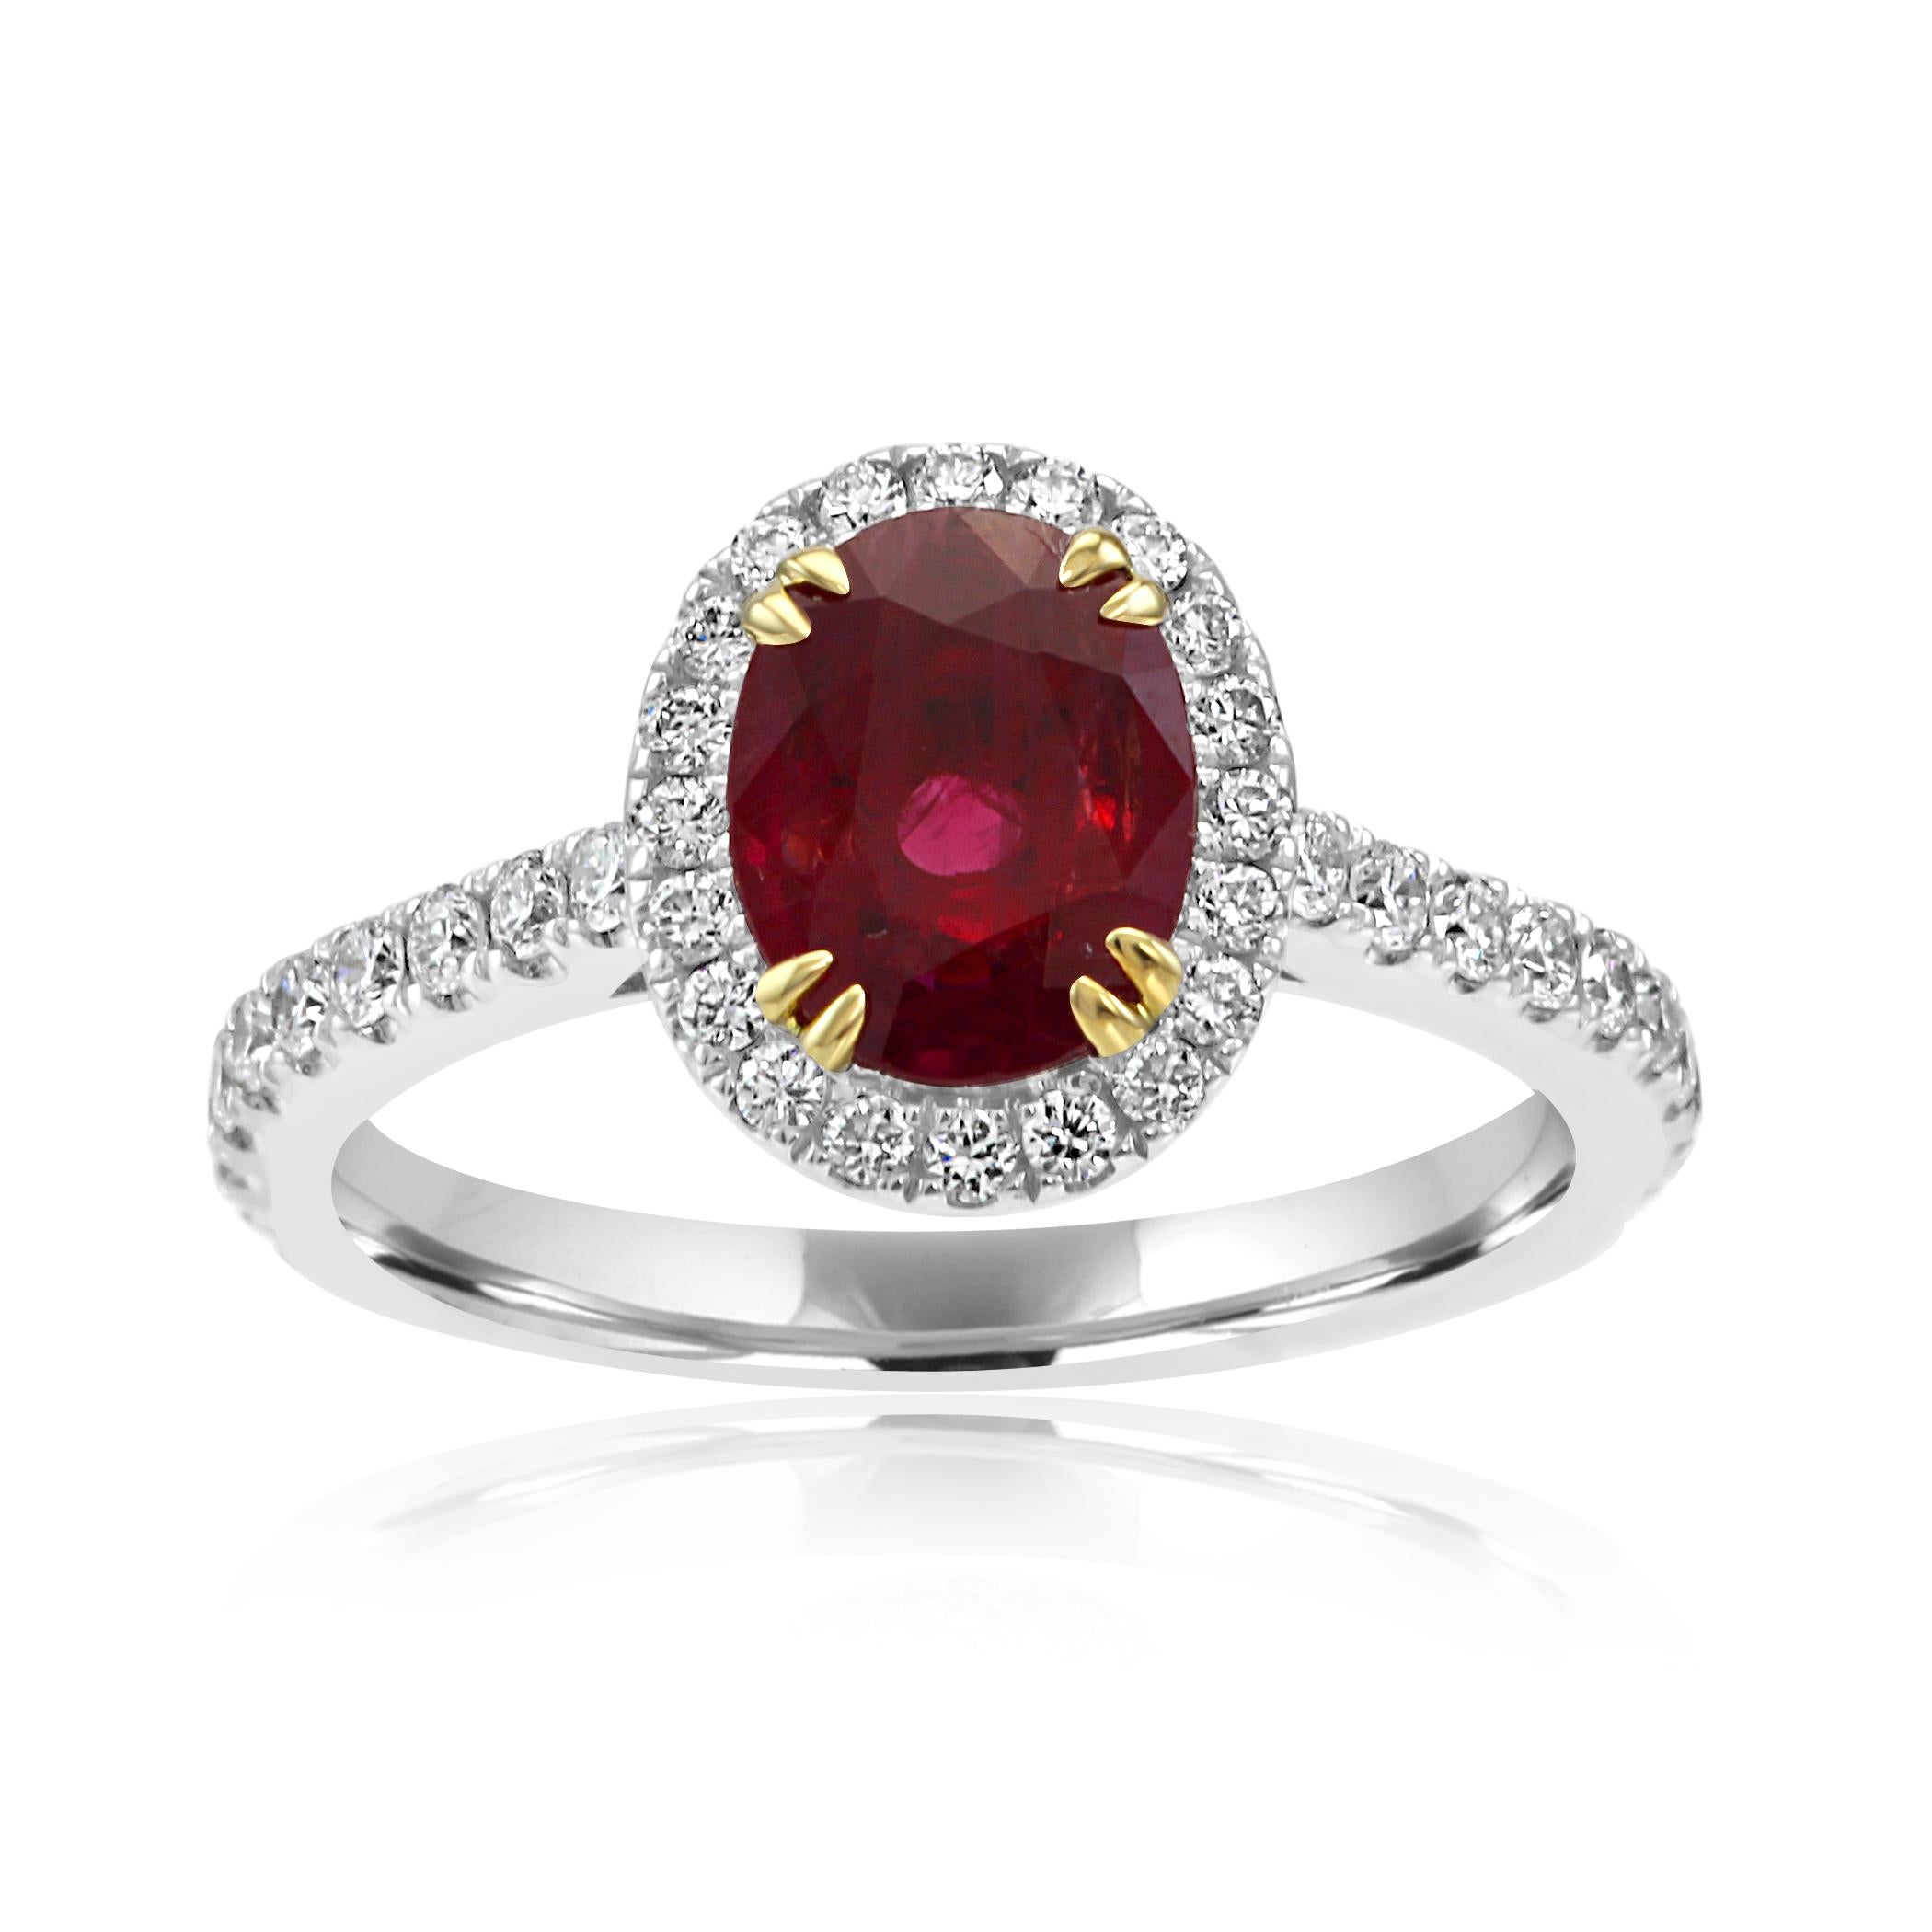 Stunning Ruby Oval 1.21 Carat encircled in a single halo of White G-H Color VS-SI Diamond Round 0.70 Carat set in gorgeous 14K White and Yellow Gold Classic always in style Fashion Cocktail Bridal Ring.

Total Weight 1.91 Carat